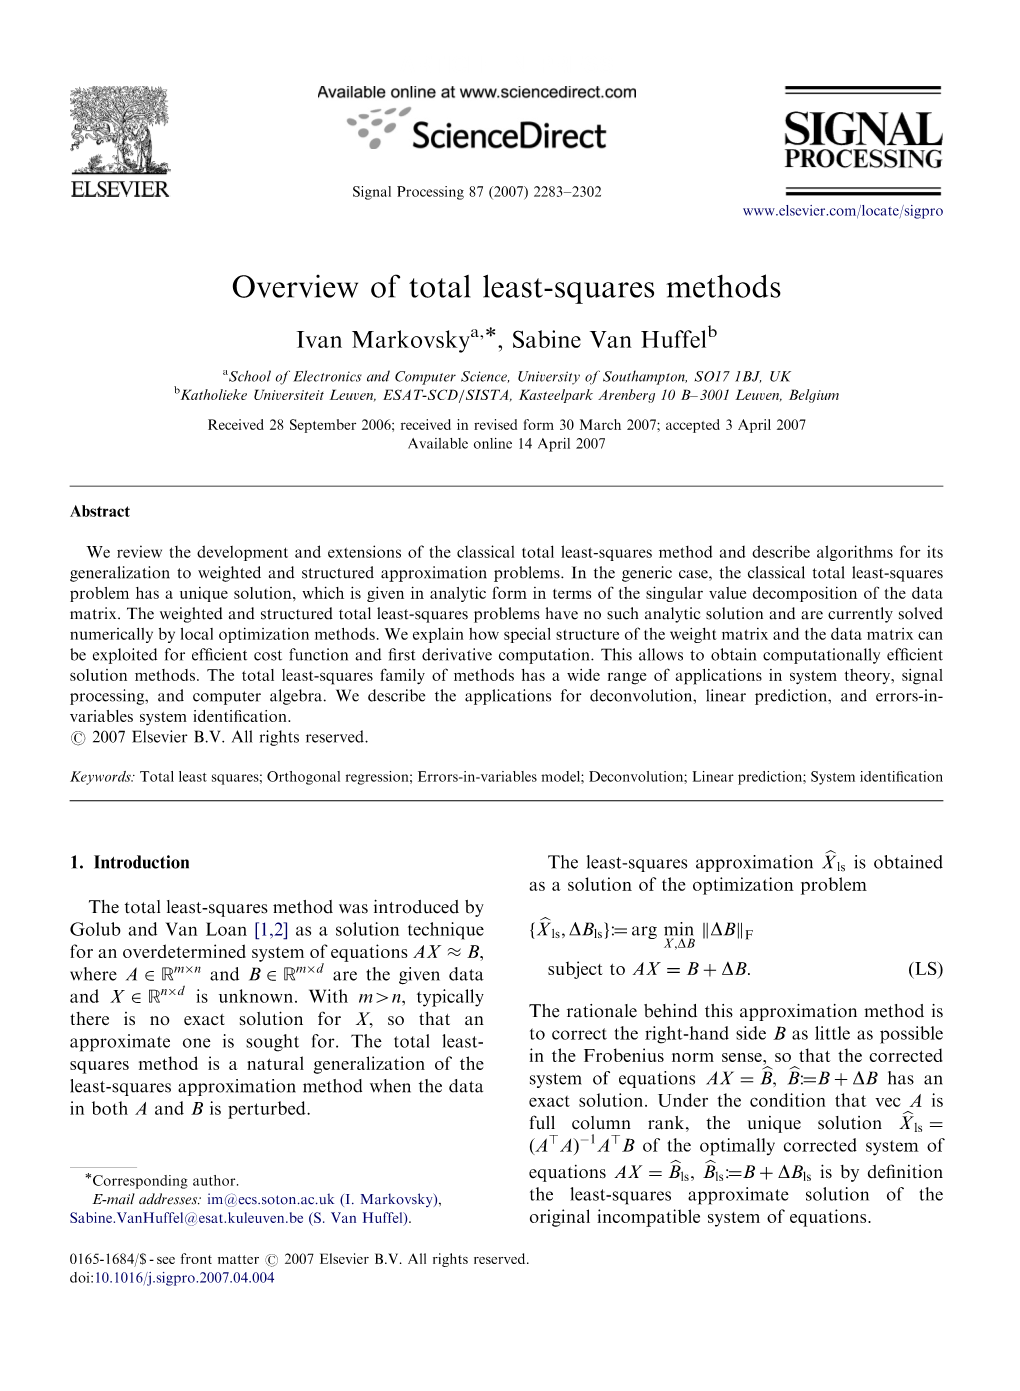 Overview of Total Least-Squares Methods